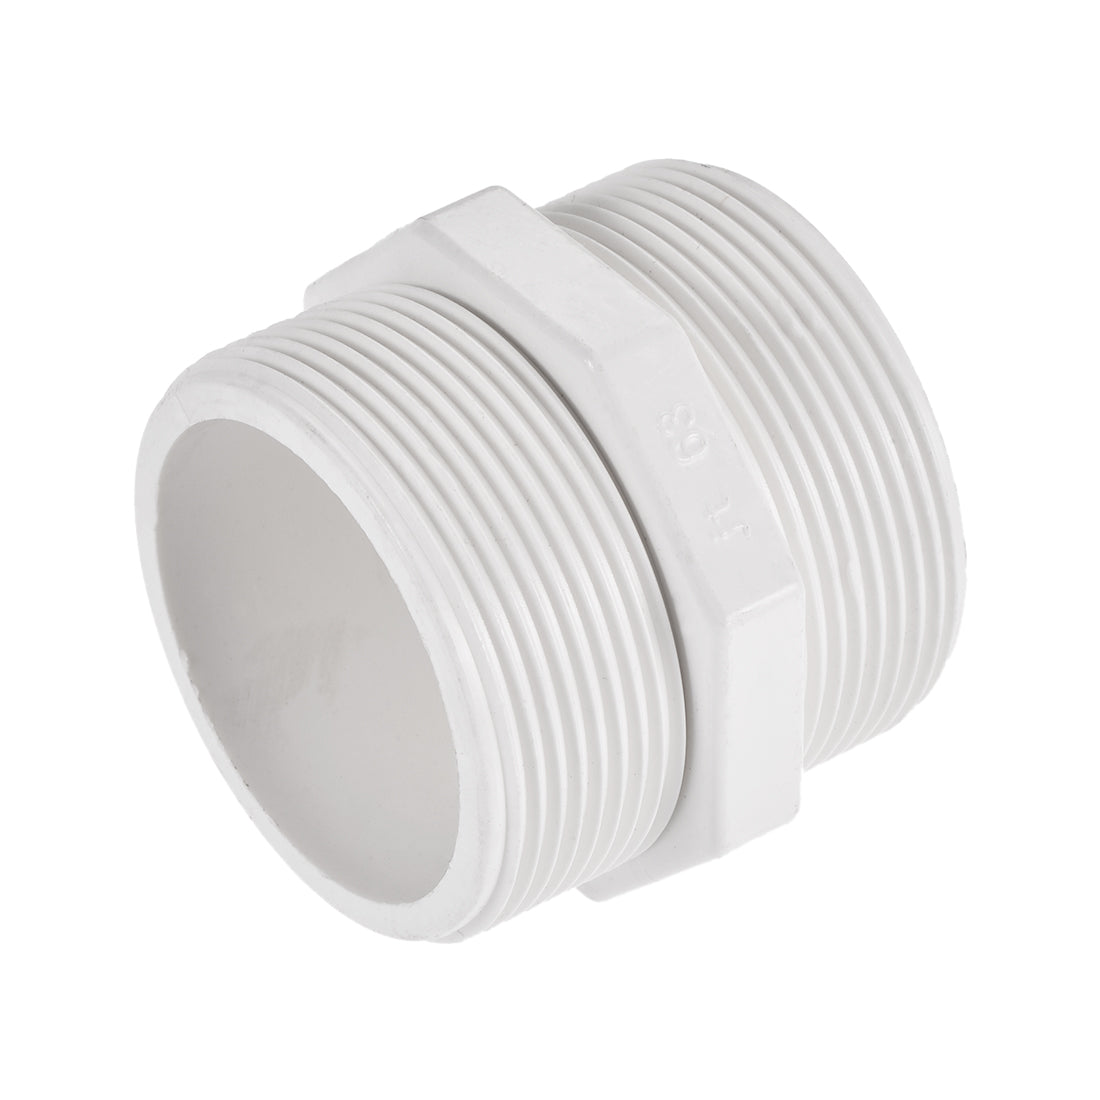 Uxcell Uxcell Pipe Fitting, G2 Male Thread, Hex Nipple Tube Adaptor Hose Connector, for Water Tanks, PVC, White